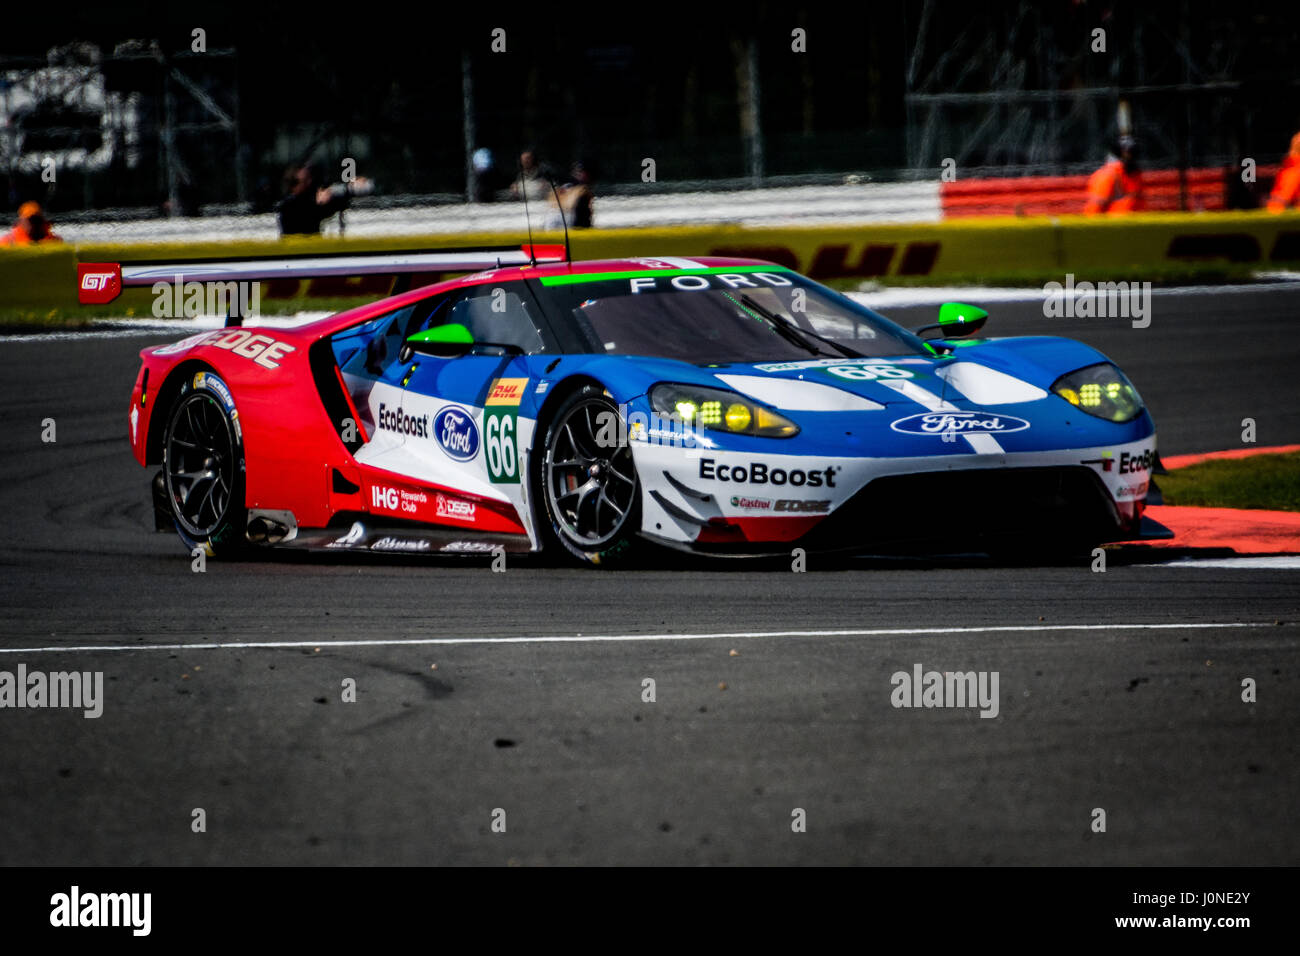 Towcester, Northamptonshire, UK. 15th April, 2017. FIA WEC racing team Ford Chip Ganassi Team UK (Stefan Mucke / Olivier Pla / Billy Johnson) drives during qualifying session for the 6 Hours of Silverstone of the FIA World Endurance Championship at Silverstone Circuit (Photo by Gergo Toth / Alamy Live News) Stock Photo